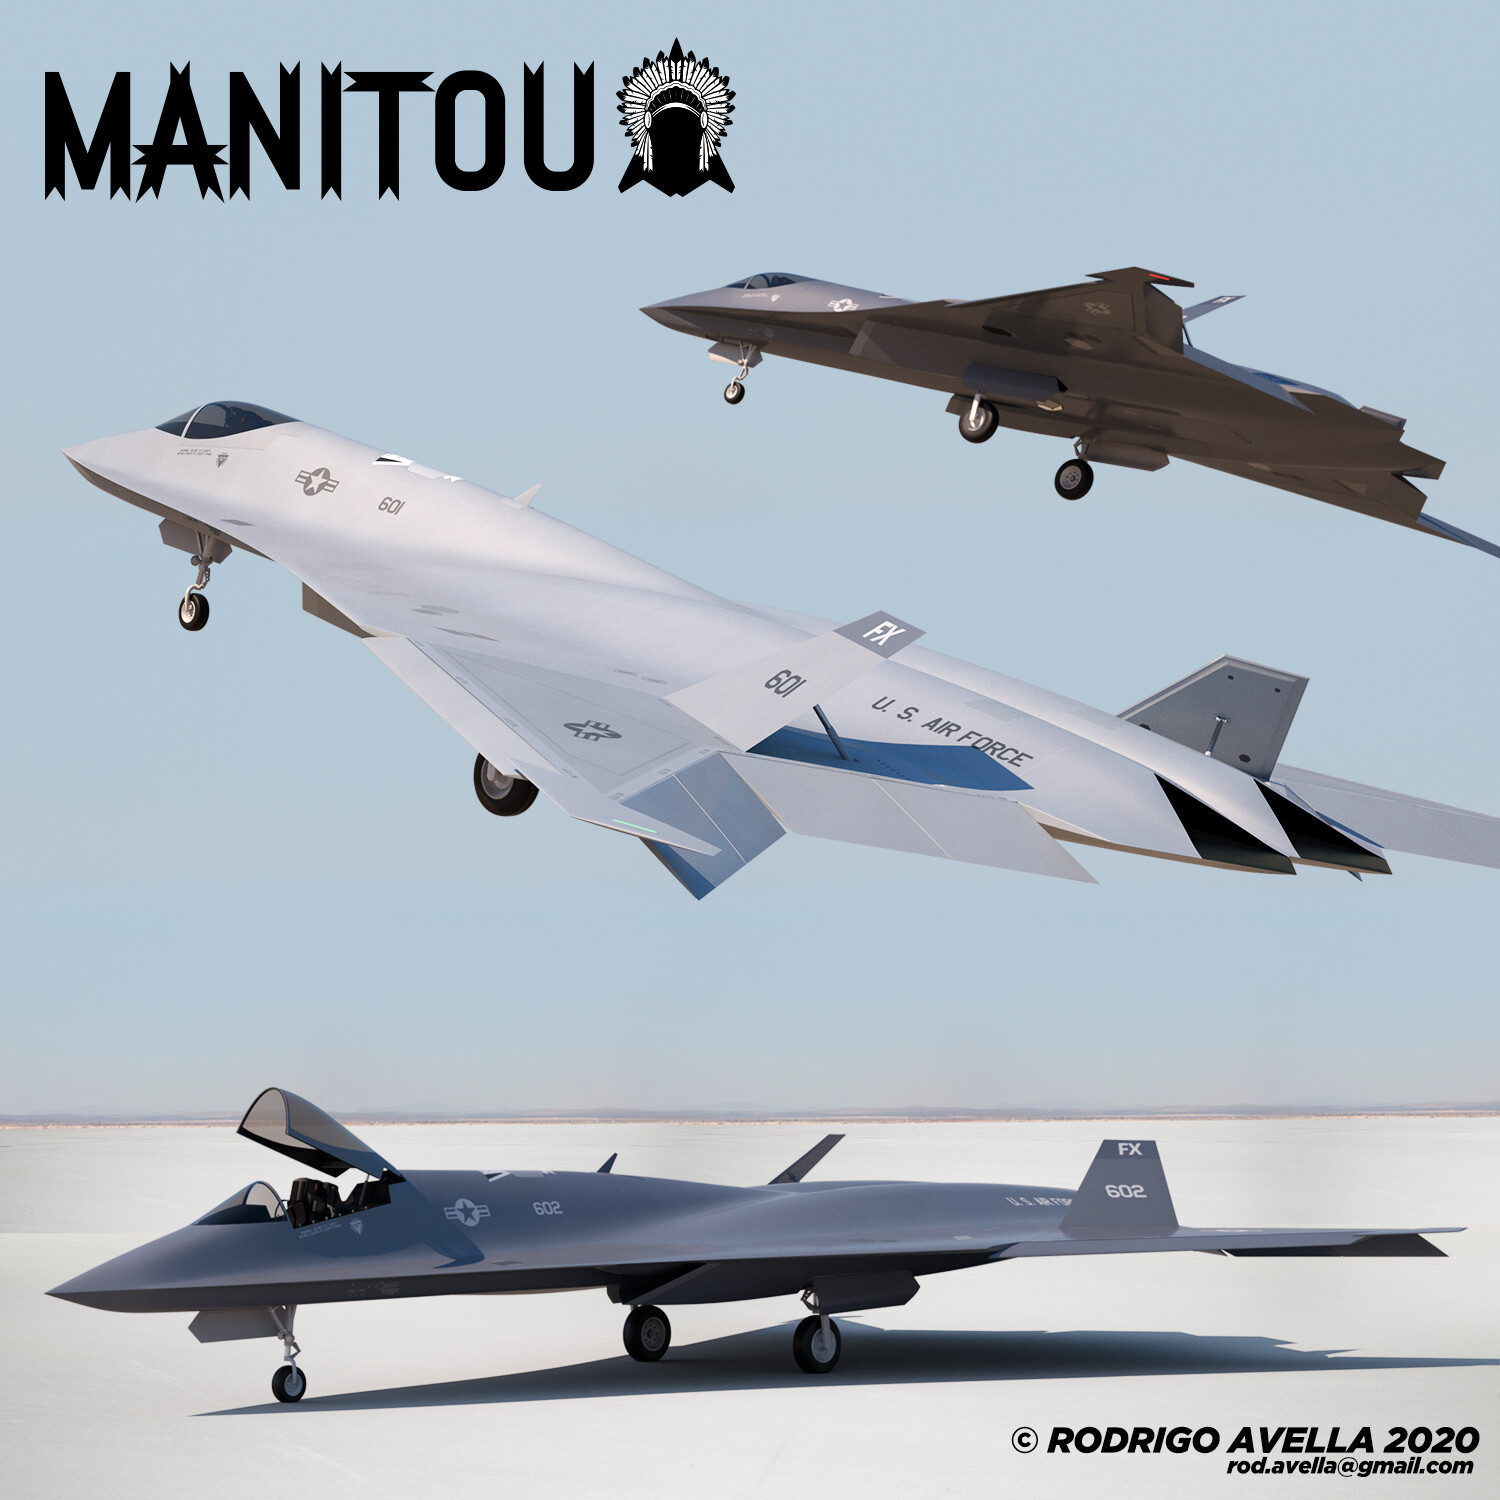 Manitou - Sixth generation fighter concept